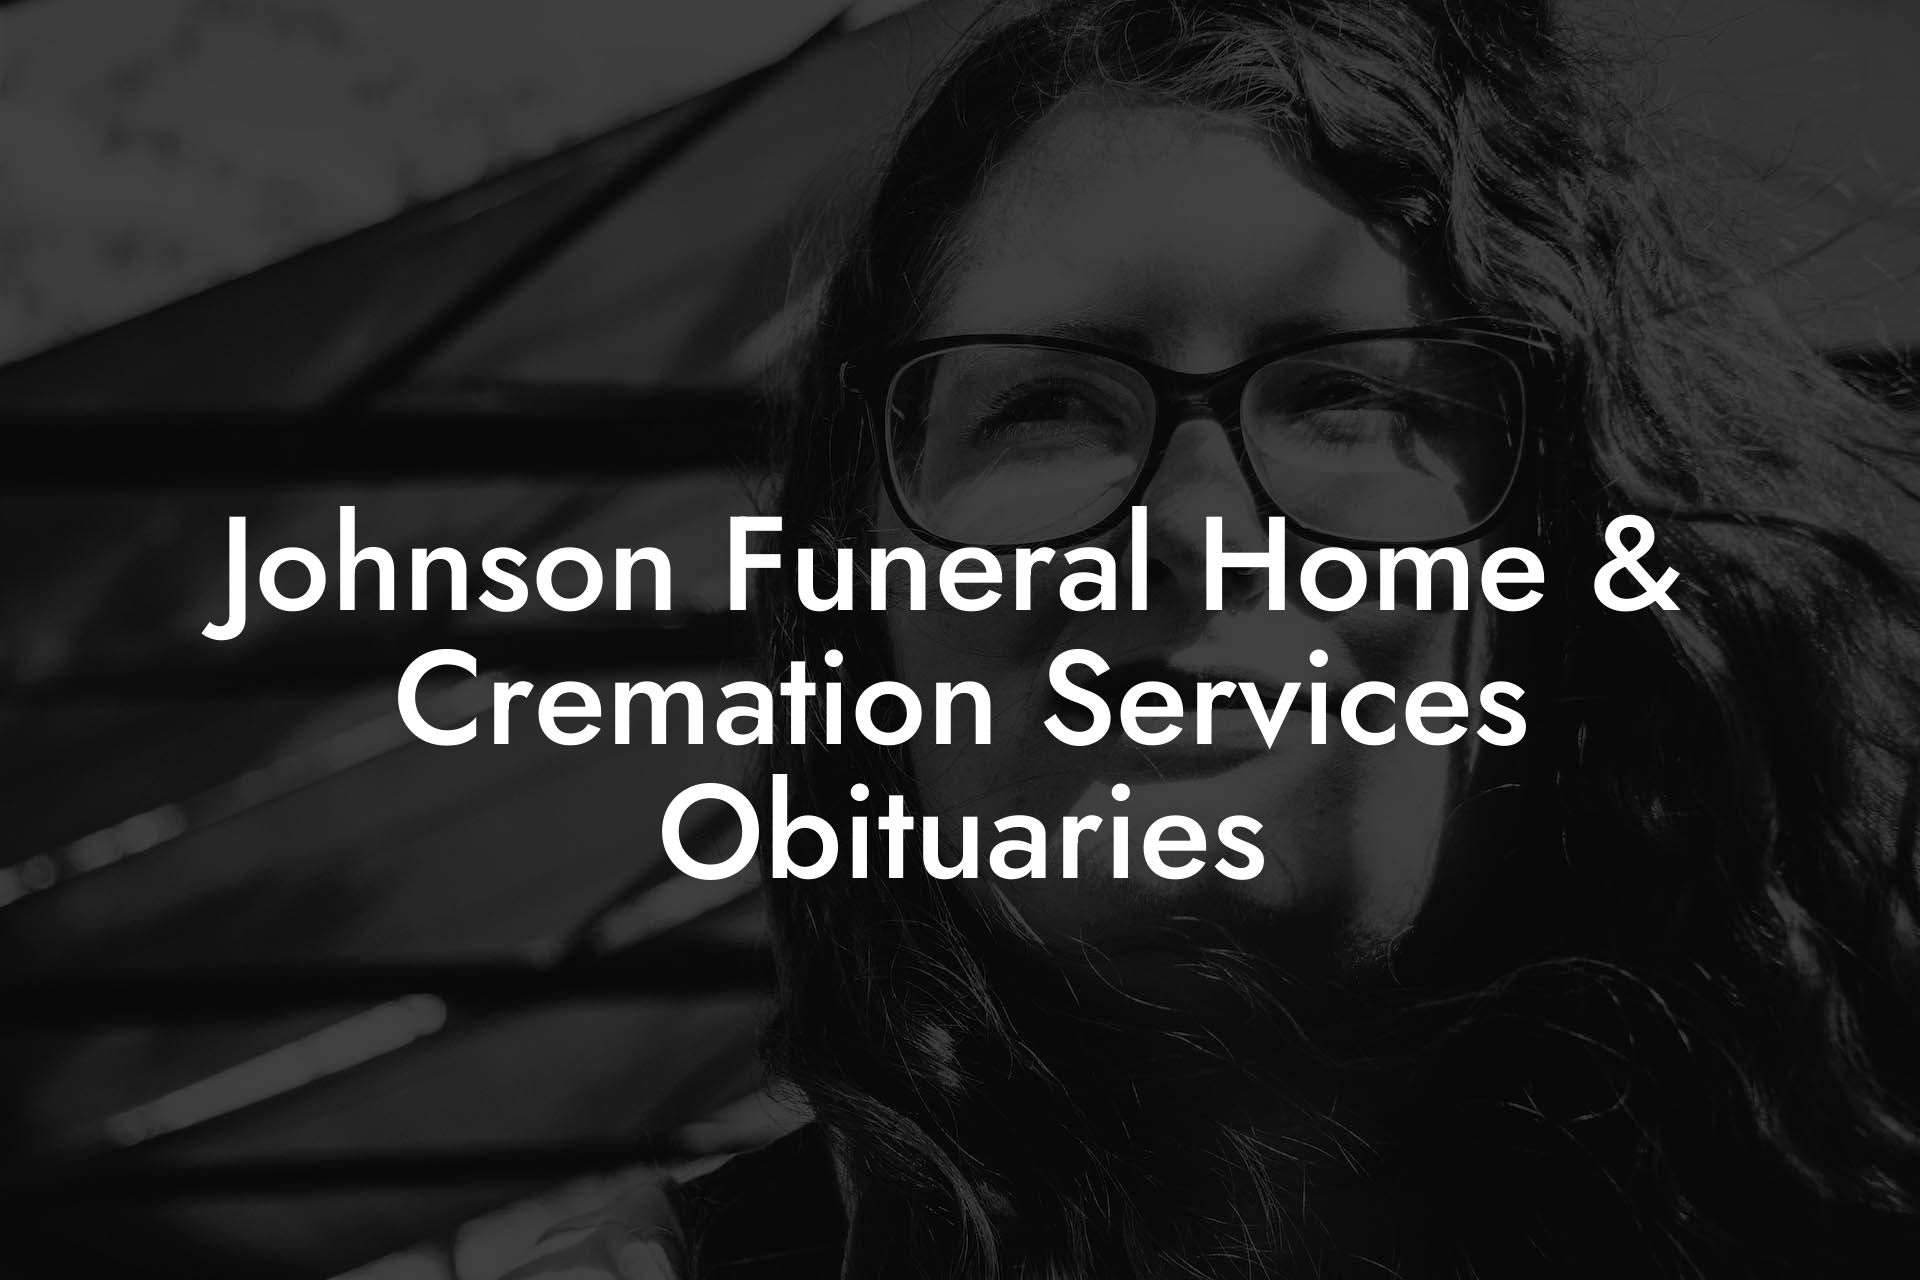 Johnson Funeral Home & Cremation Services Obituaries